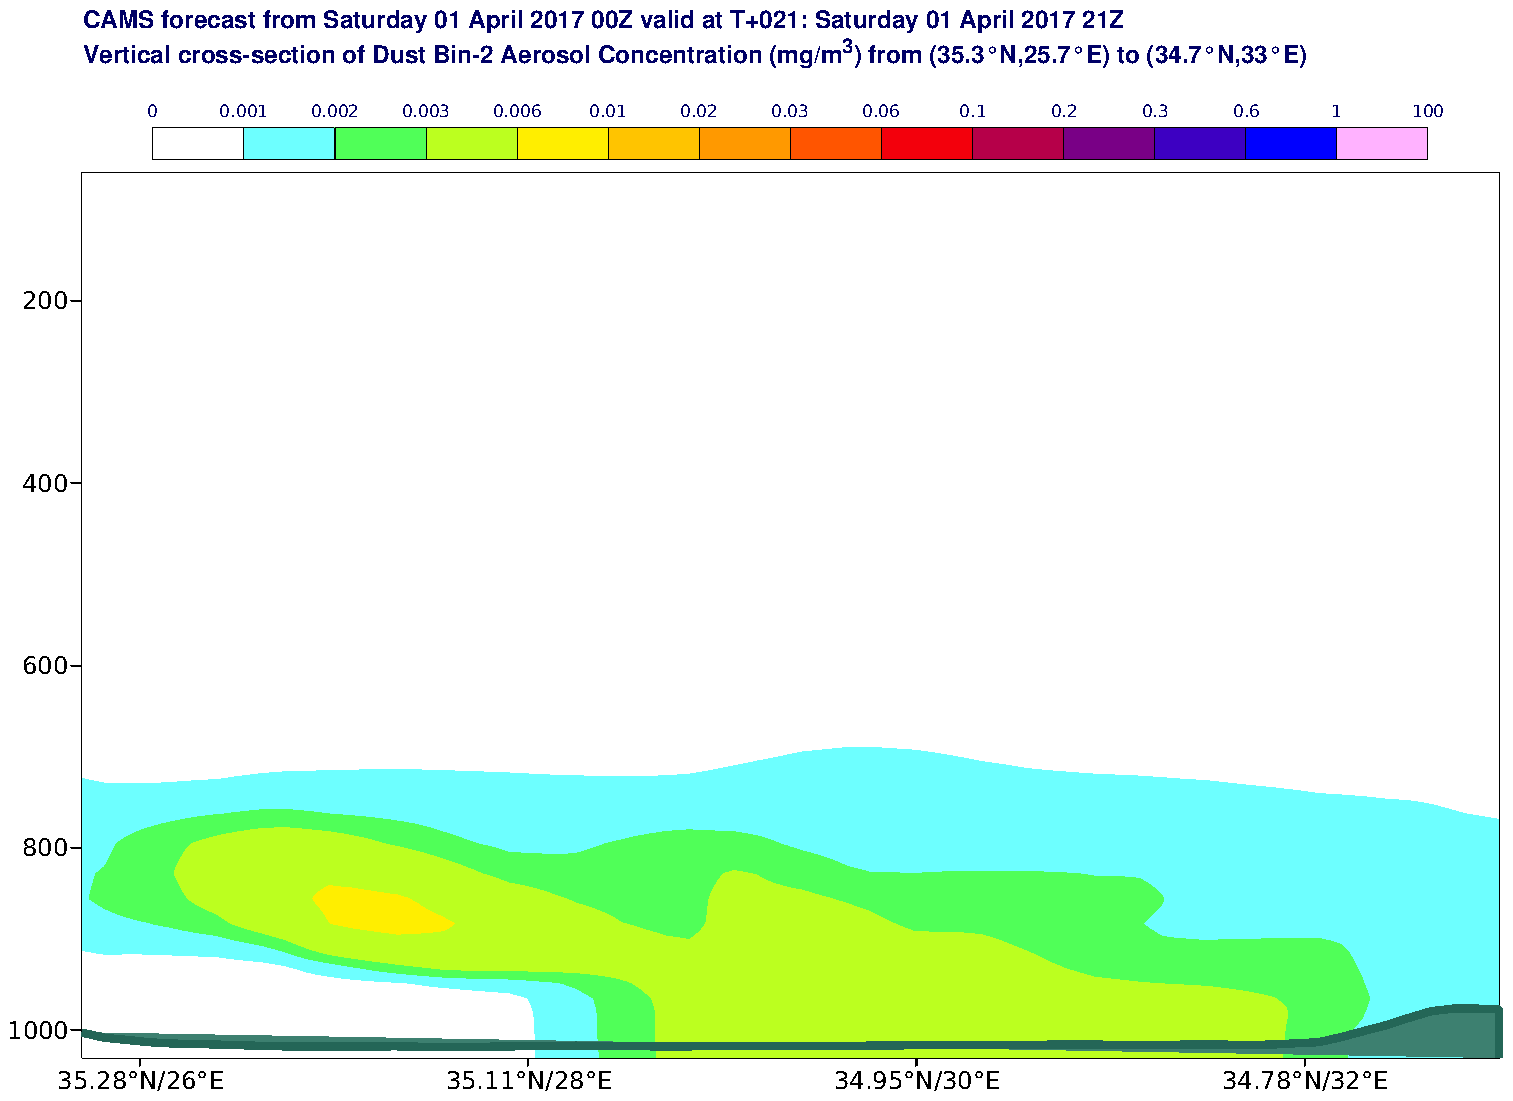 Vertical cross-section of Dust Bin-2 Aerosol Concentration (mg/m3) valid at T21 - 2017-04-01 21:00